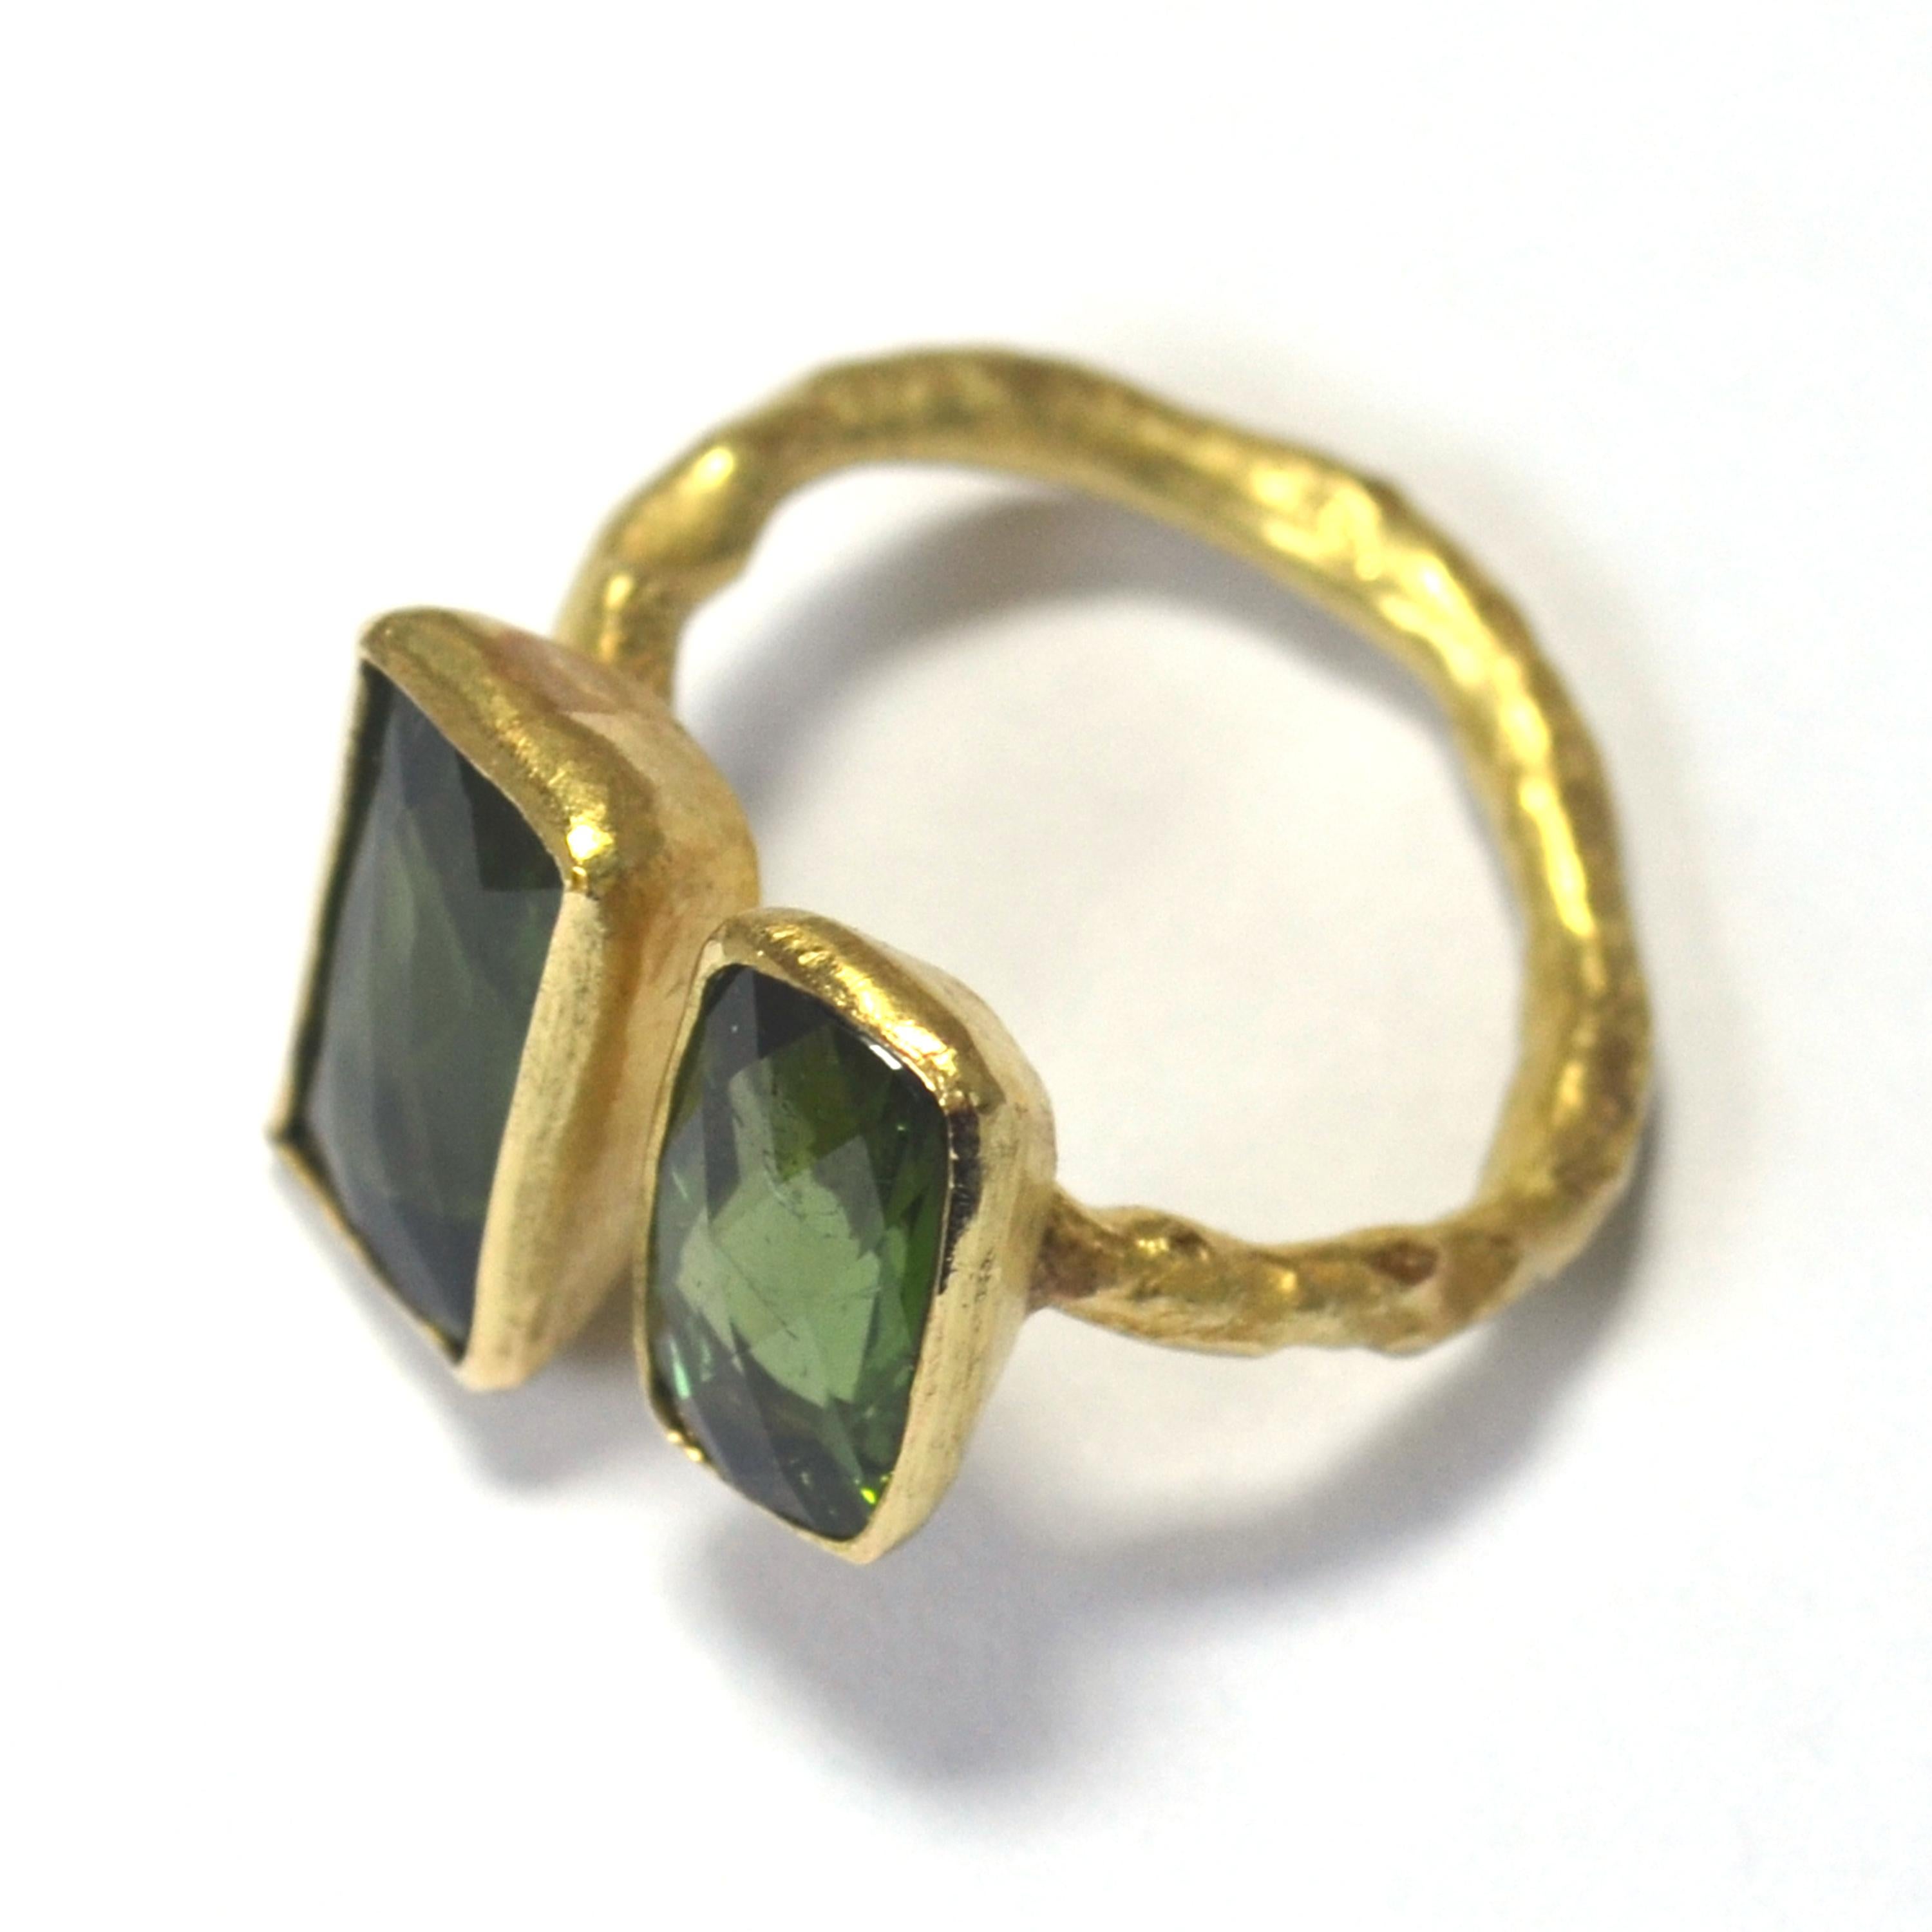 18k yellow gold reticulated texture ring handmade by Disa Allsopp in her London Studio. Features two stunning bottle green tourmaline stones, rectangular shape with chequerboard faceting on the top table of the stones. The deep hues of the stones